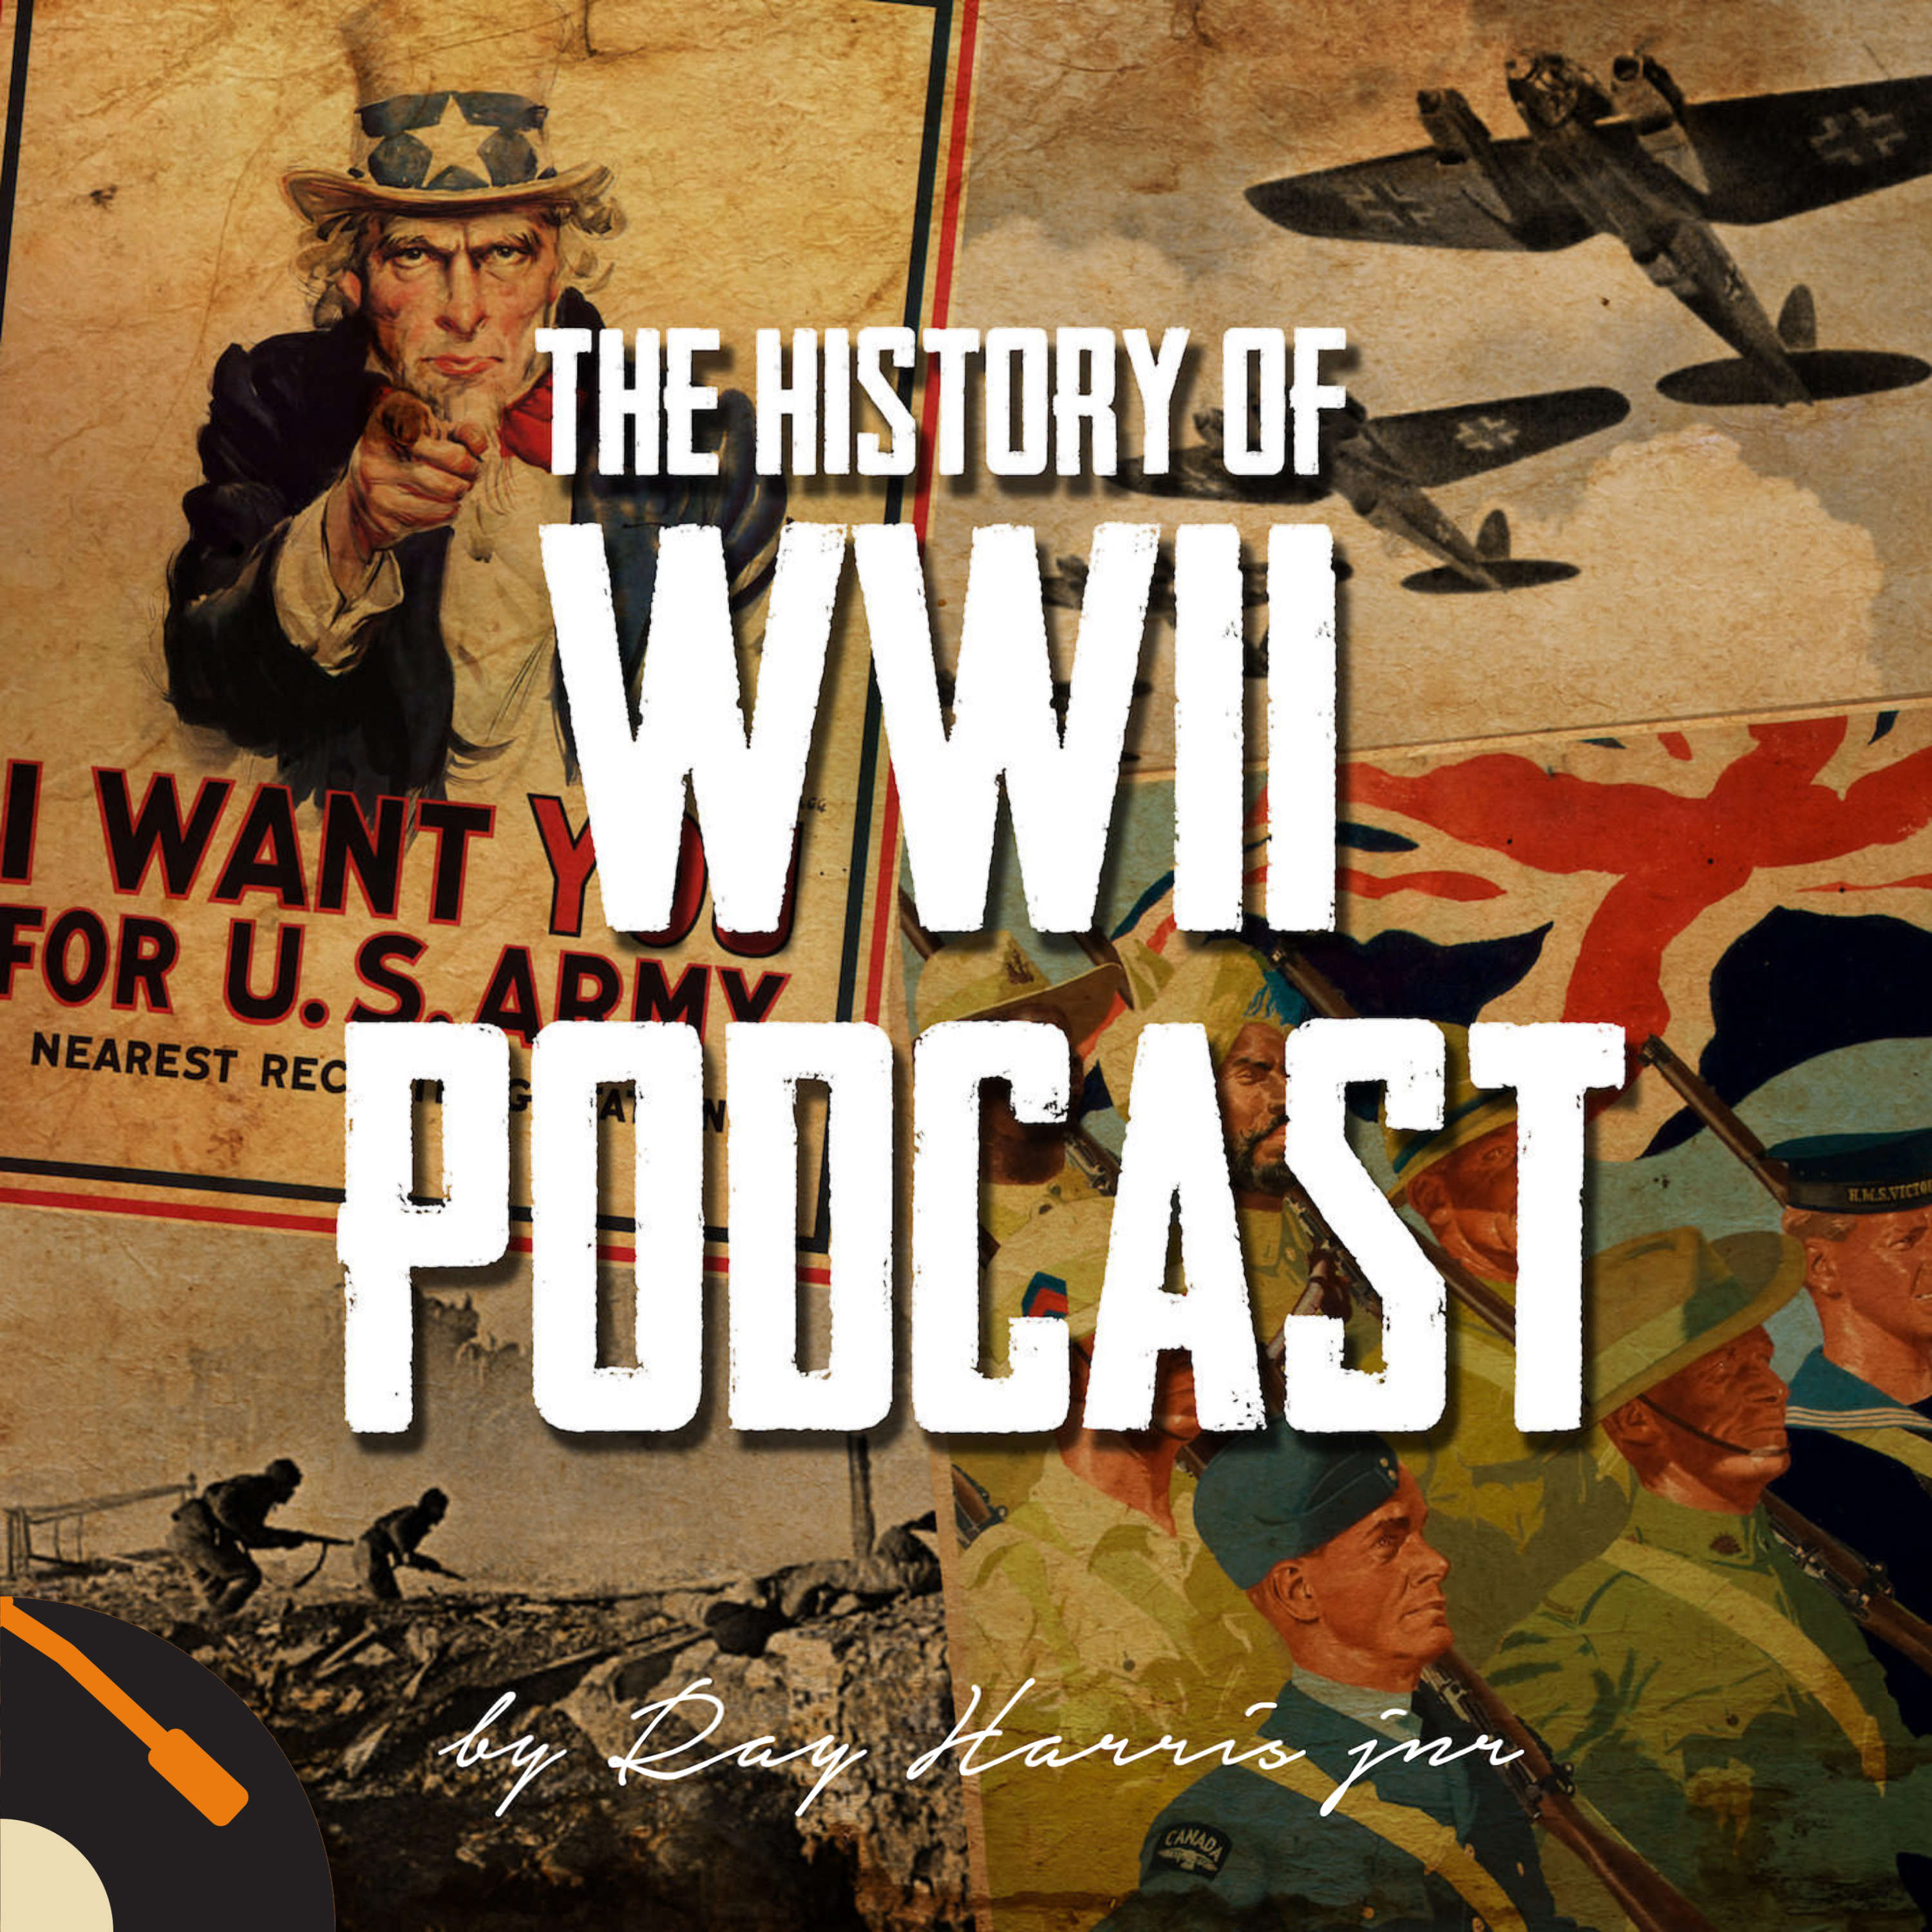 Episode 438-The Longest One Day Casualty List in Canadian History : With the survivors back in Britain44 questions are being asked44 facts and figures are being compiled Canada has questions but they will not like the answers Meanwhile44 Churchill is meeting with Stalin about fighting Nazi Germany togetherRSS https://feedsmegaphonefm/historyofworldwariiFacebook https://wwwfacebookcom/wwii45Twitter https://twittercom/WW2PodcasterInstagram https://wwwinstagramcom/rayharrisjr/TikTok https://wwwtiktokcom/wwiiguyYouTube https://wwwyoutubecom/historyofwwiipodcast8712Learn more about your ad choices Visit podcastchoicescom/adchoices